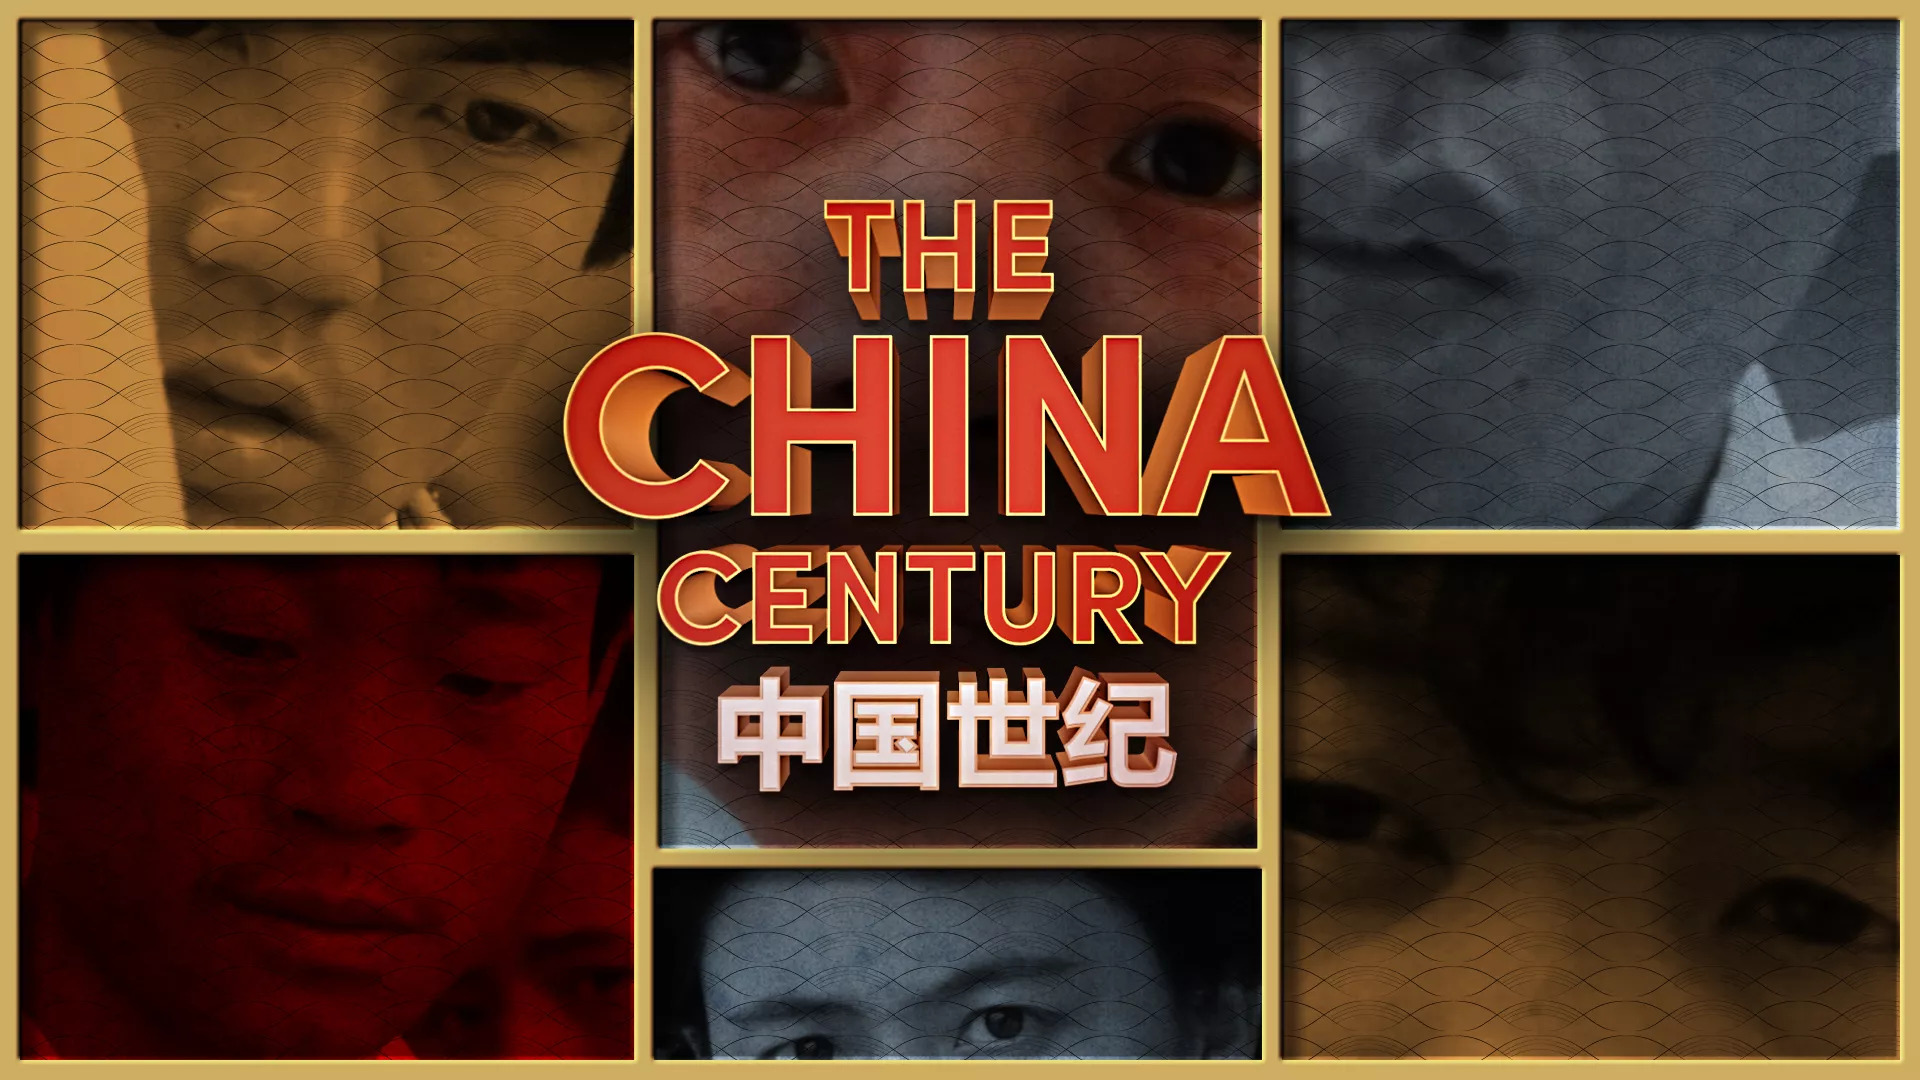 You are currently viewing The China Century episode 4